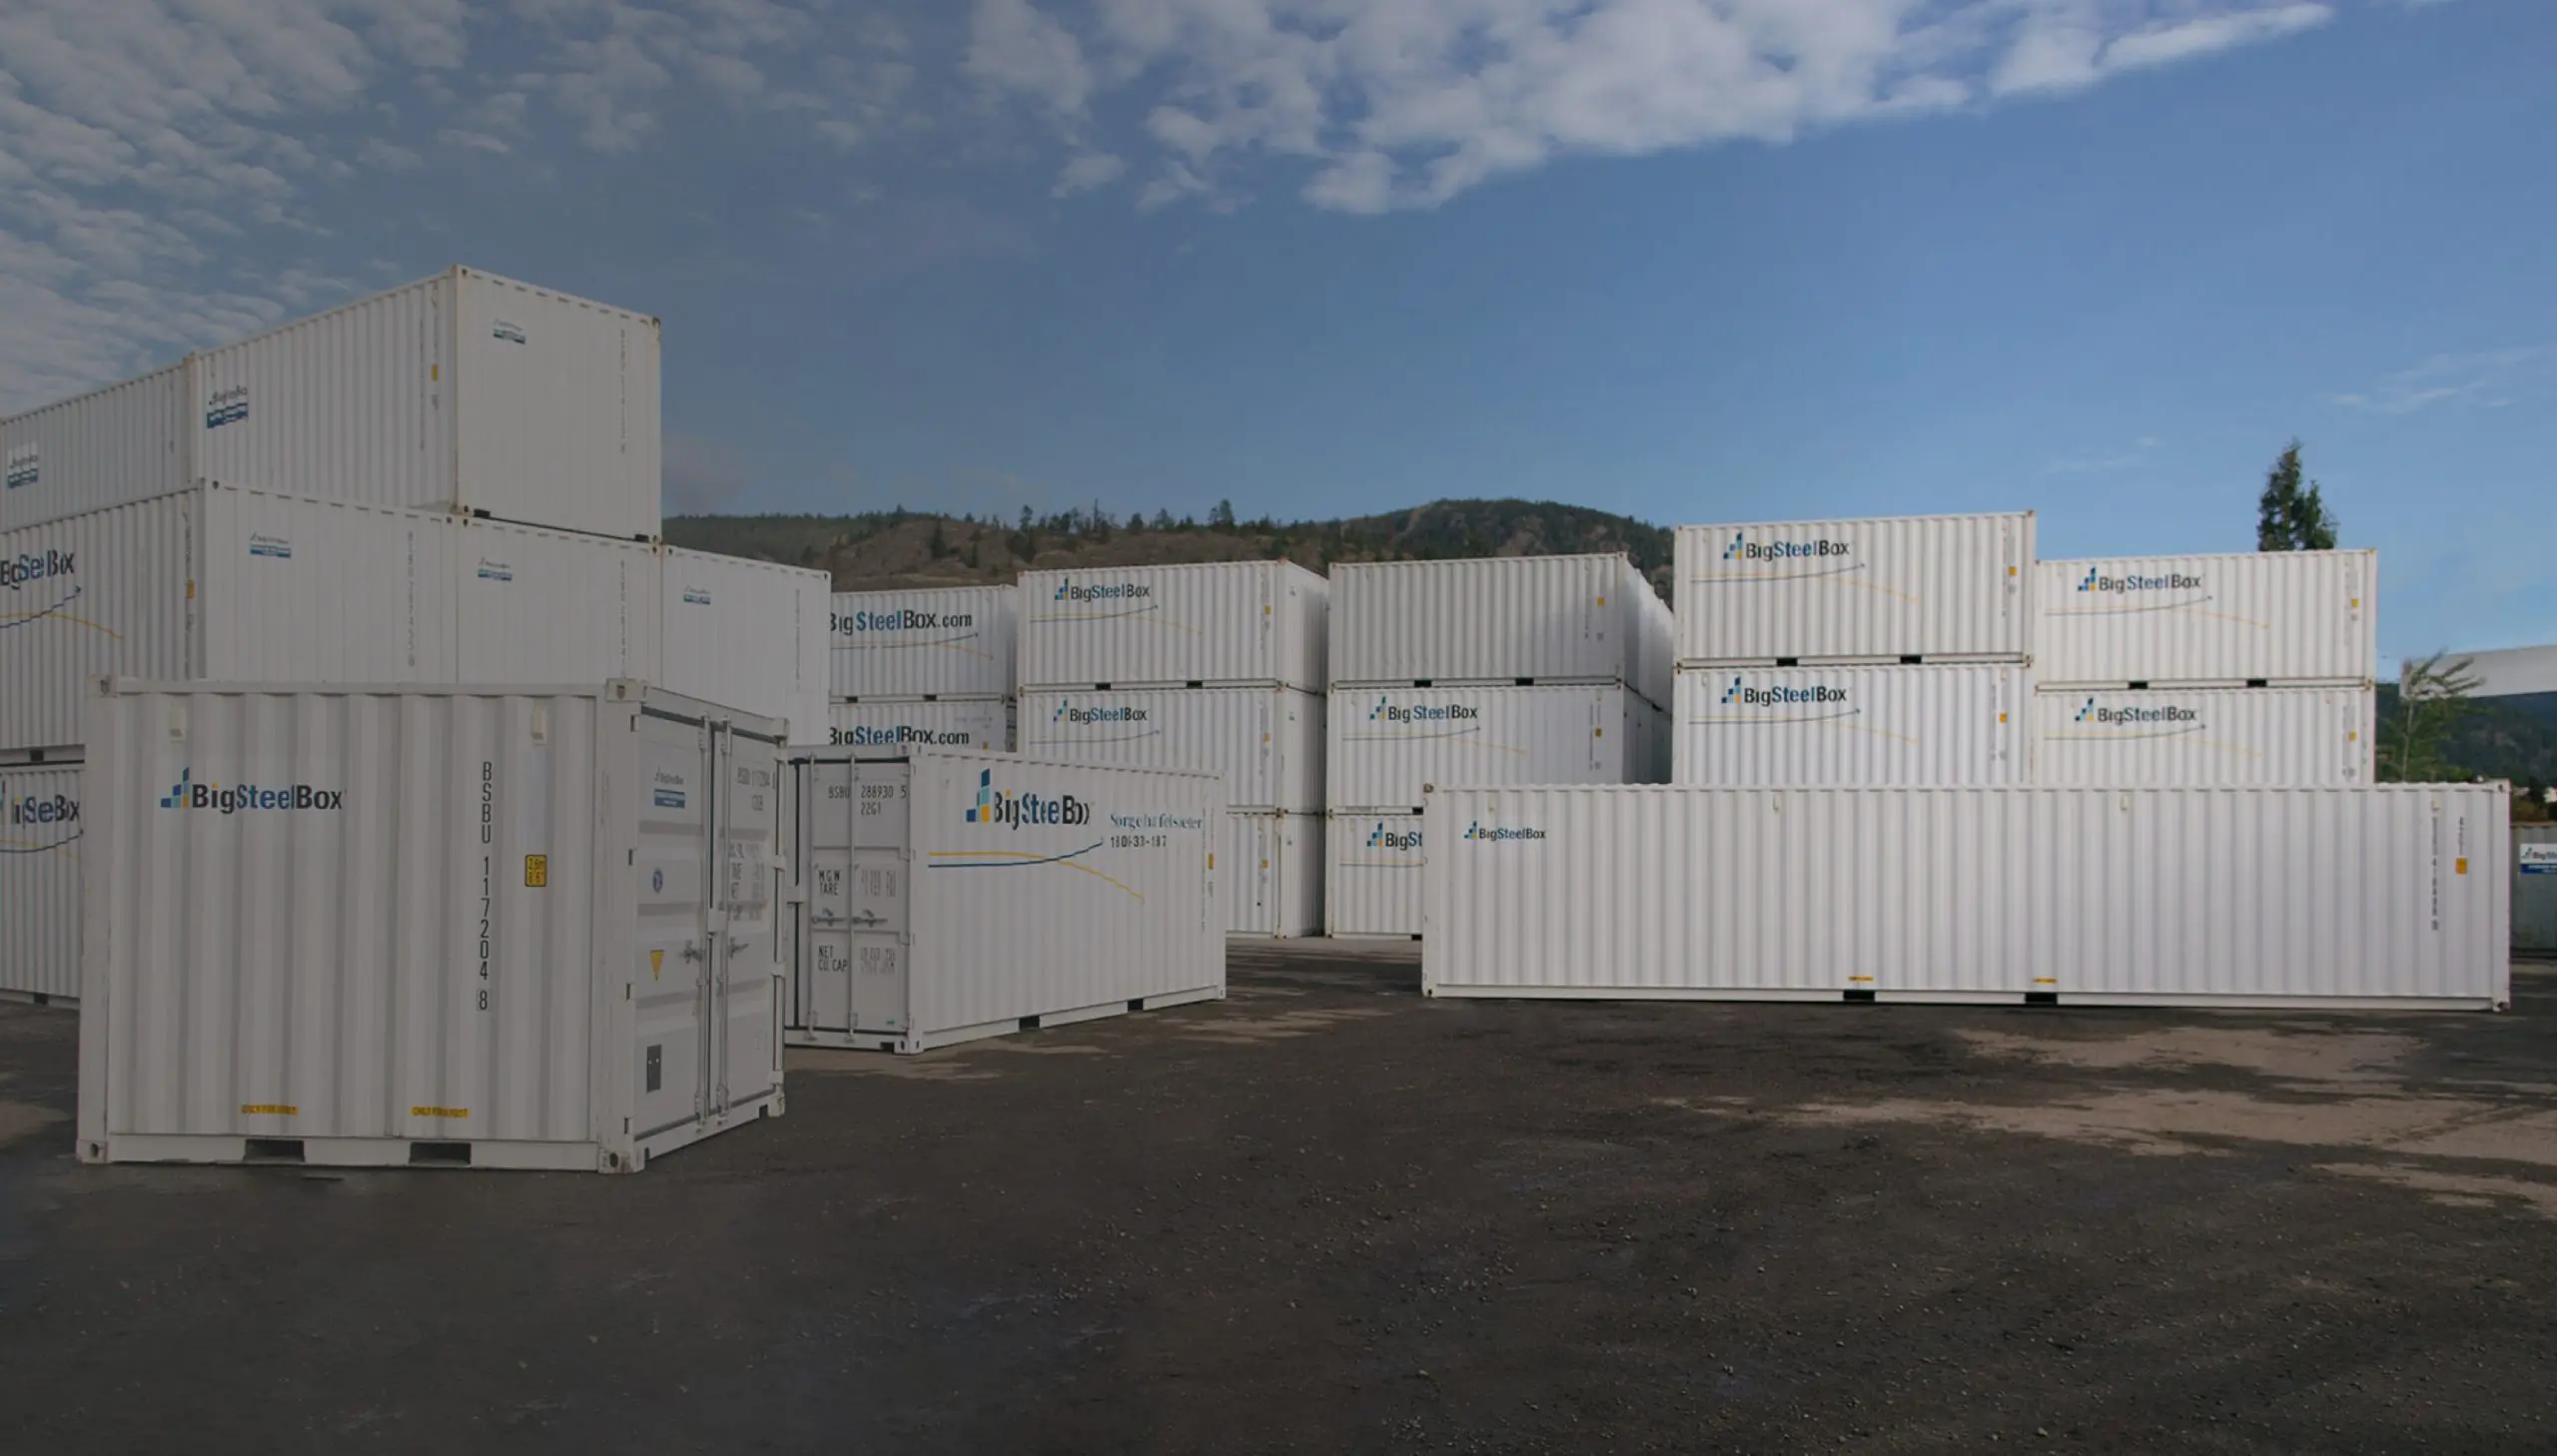 Shipping containers in a BigSteelBox storage yard